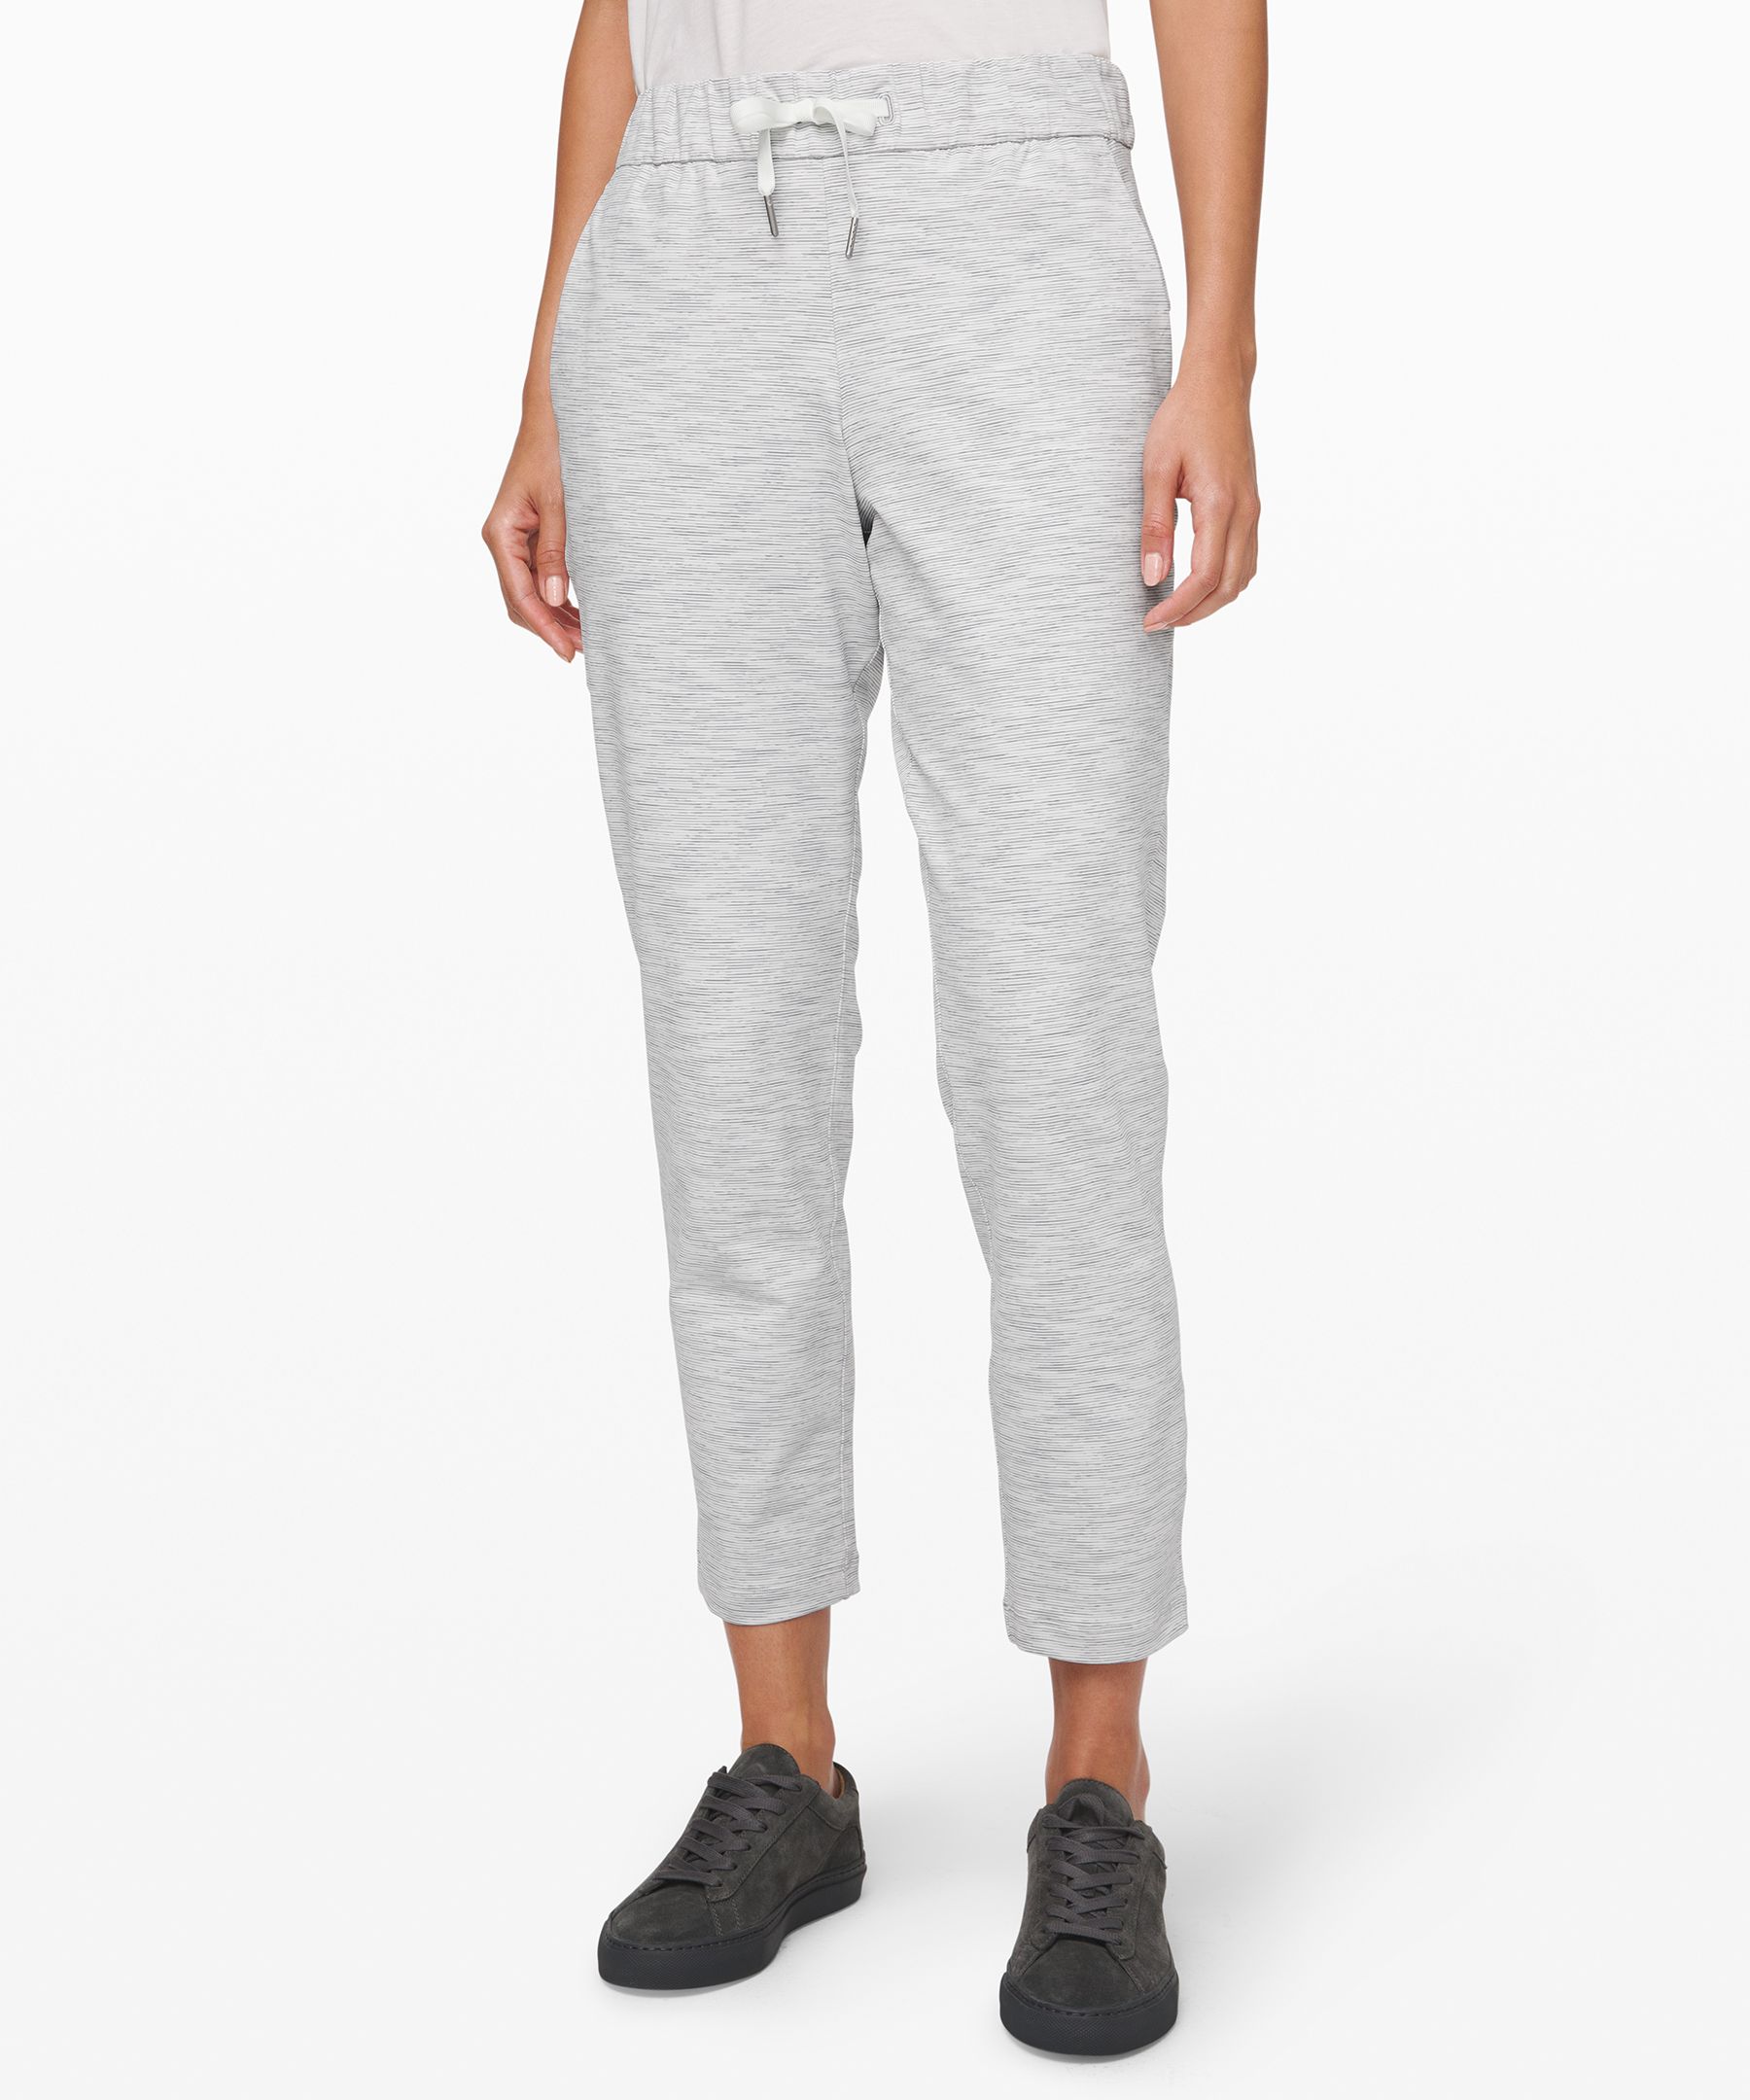 Lululemon On The Fly 7/8 Pant 27" In White